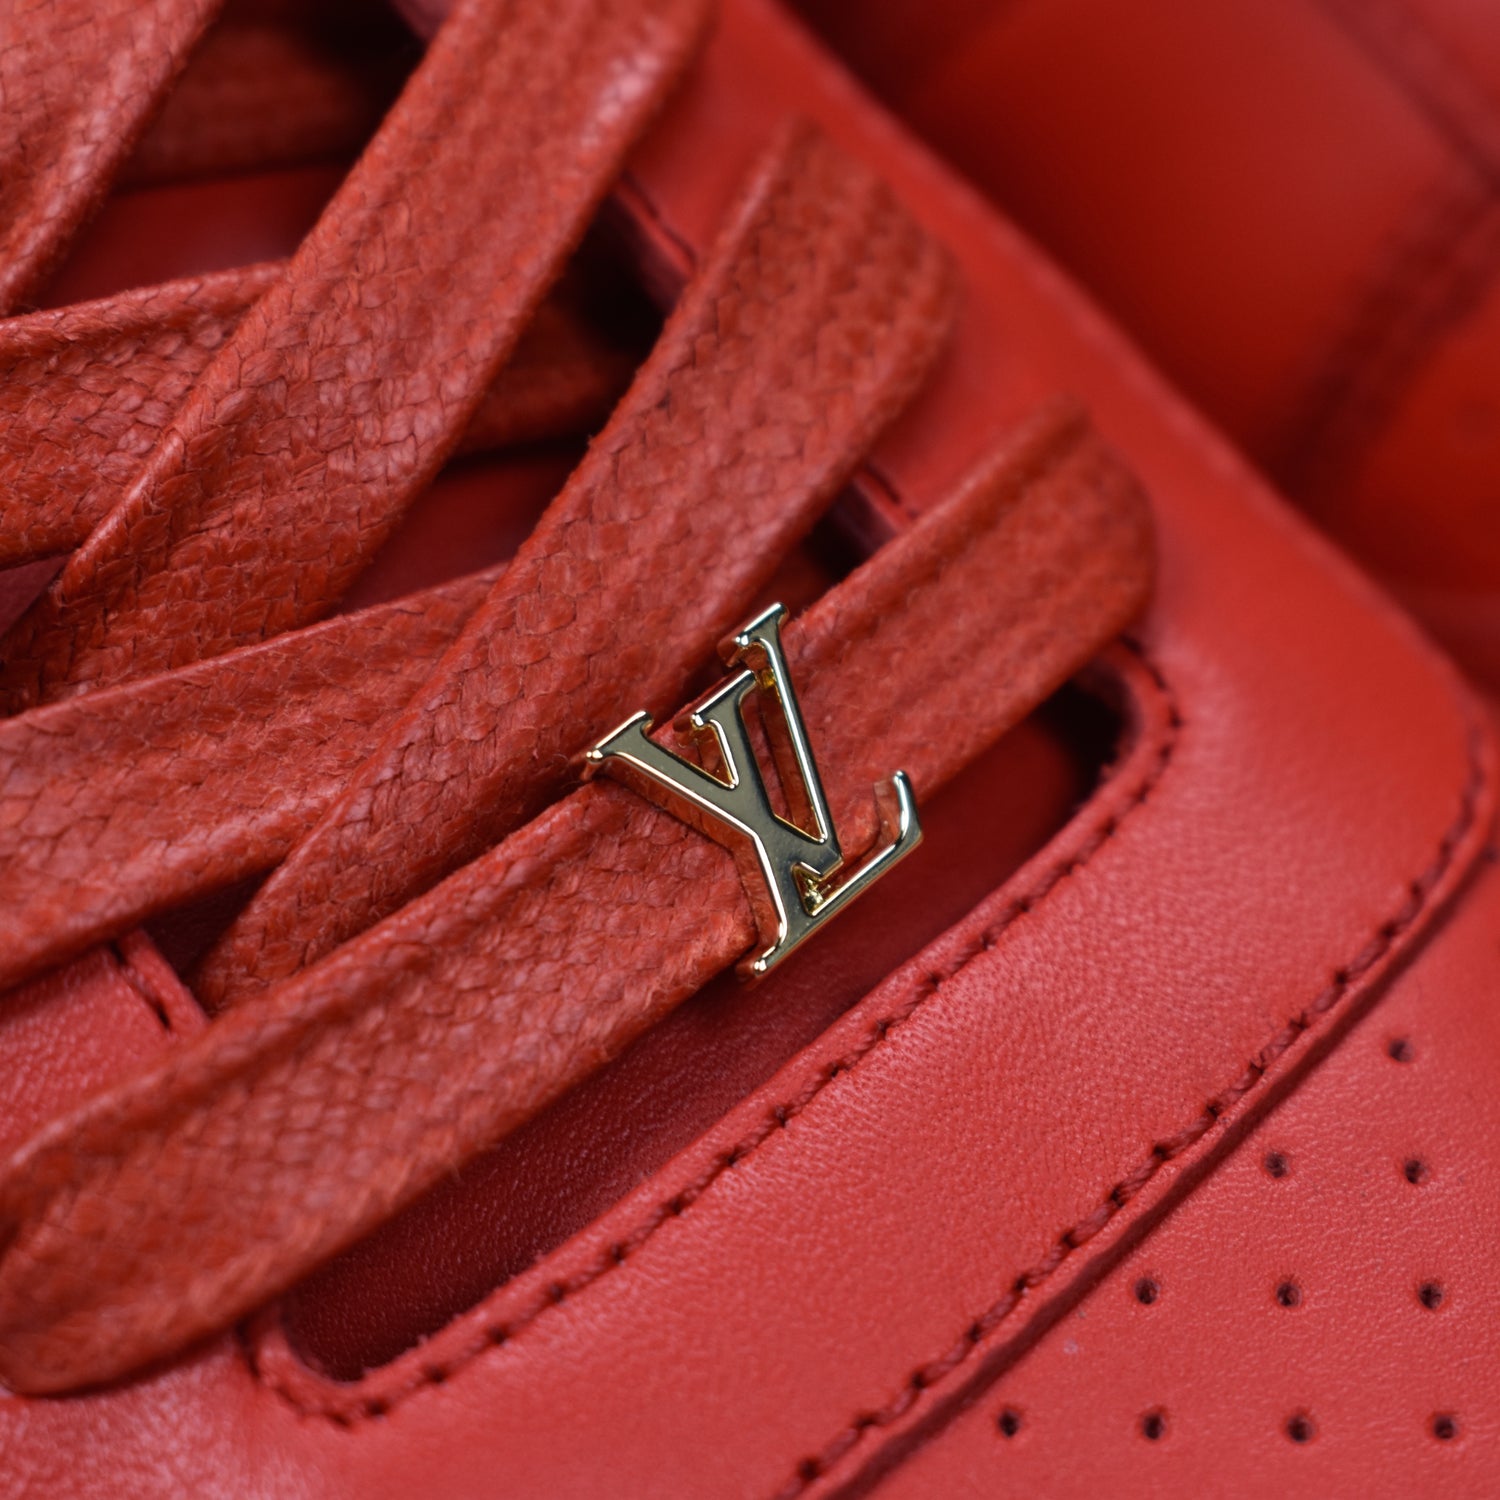 Louis Vuitton x Supreme Ny Red Leather Run Away Sneakers Shoes Trainers